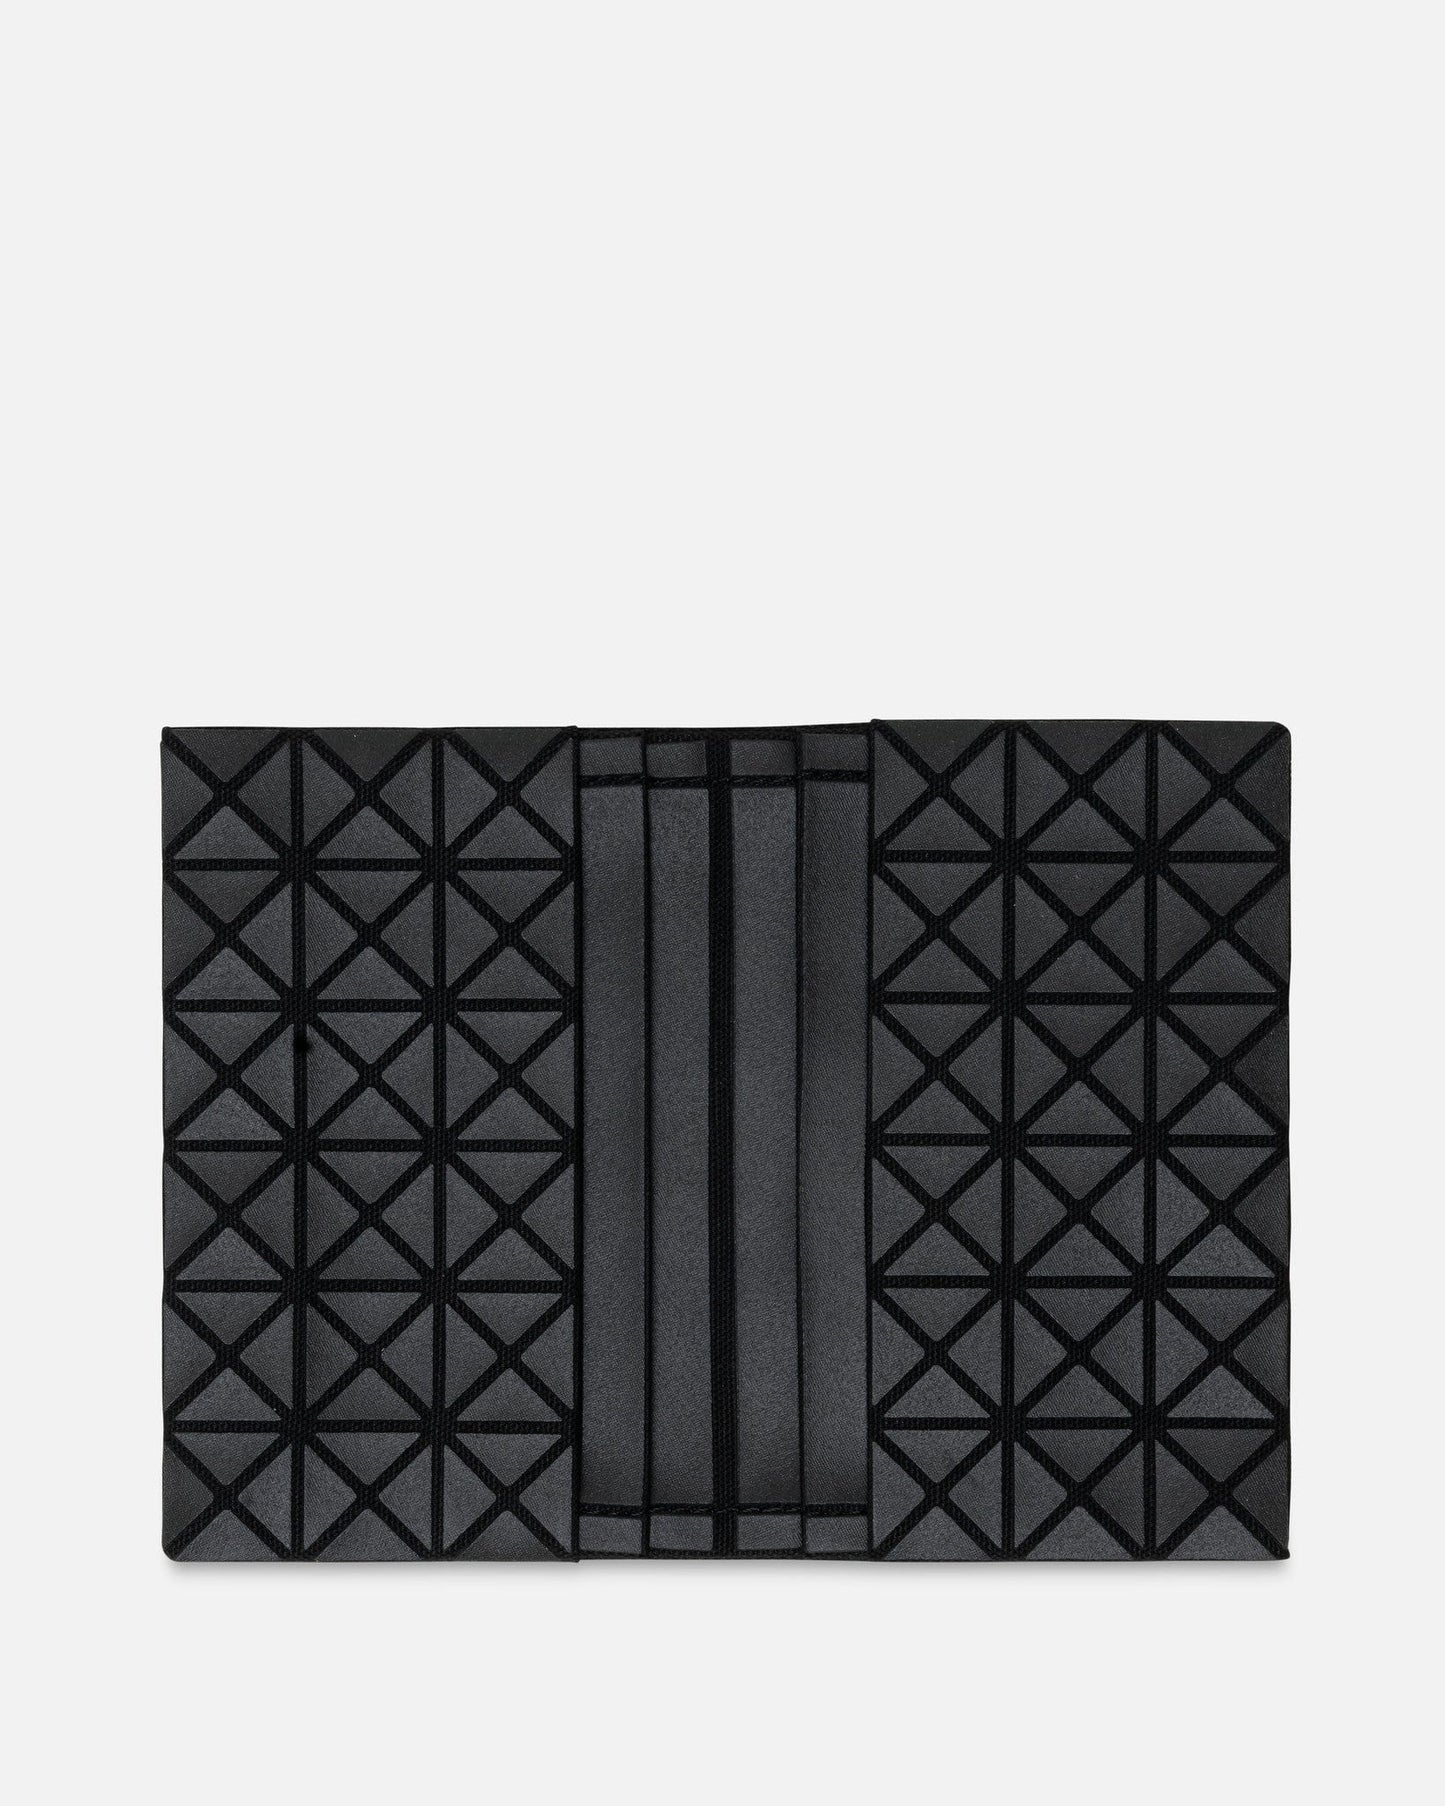 Bao Bao Issey Miyake Leather Goods Oyster Card Case in Matte Black